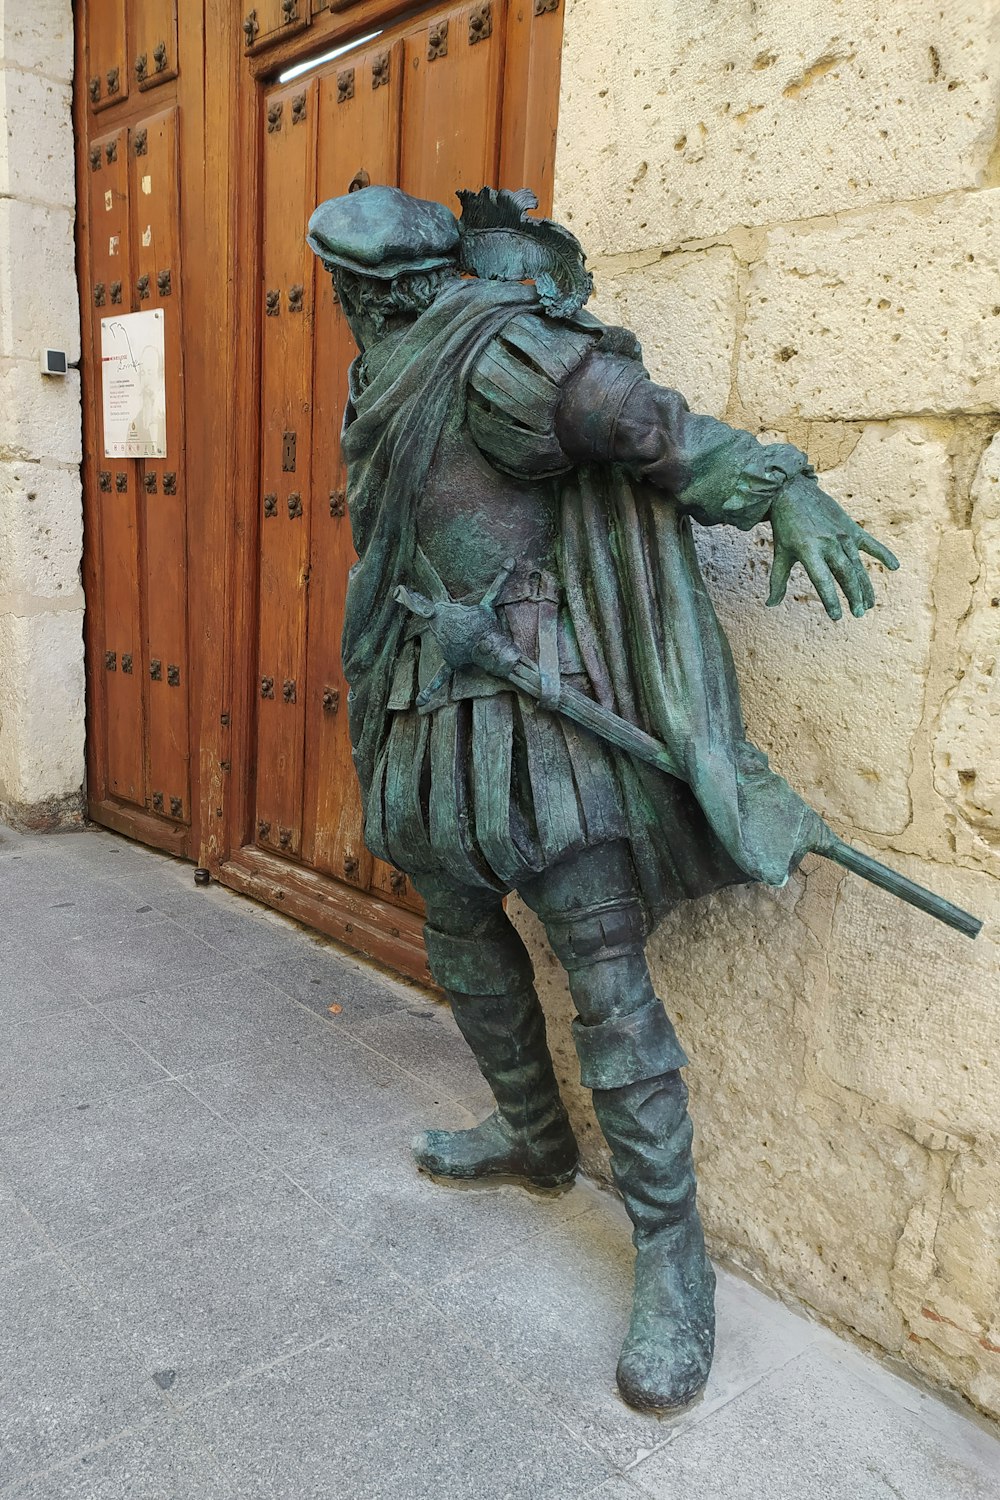 a statue of a person in armor